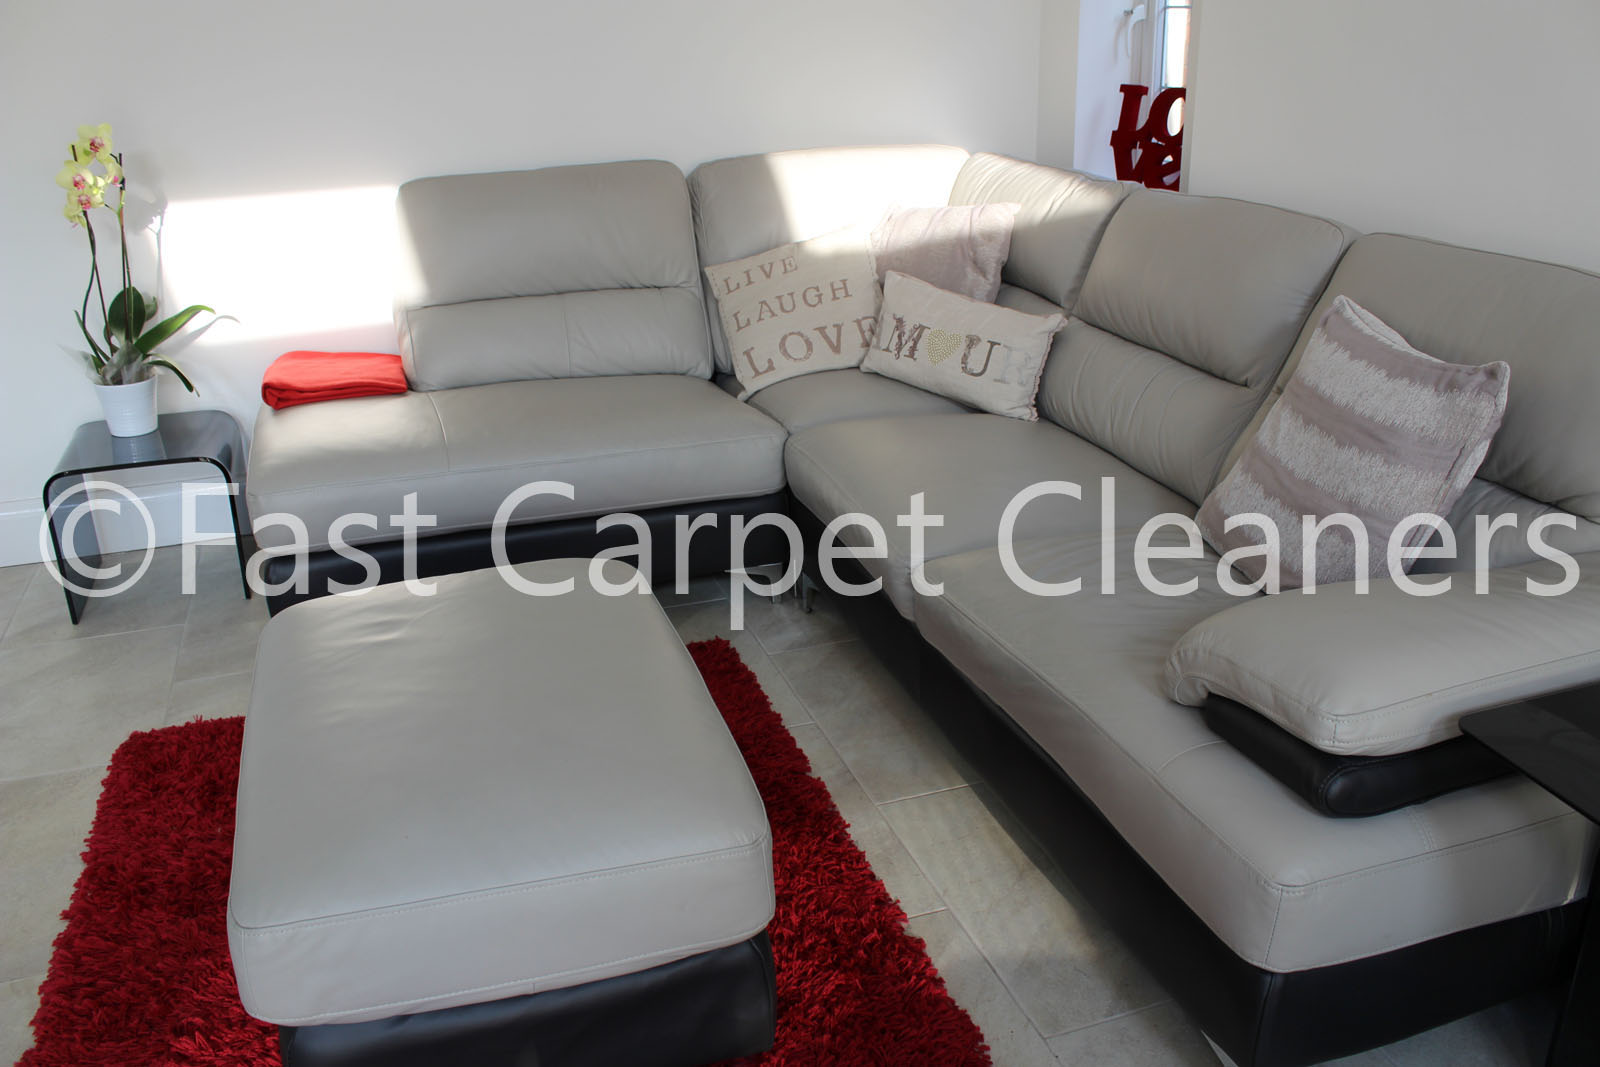 Upholstery-Cleaning-Services-Crawley